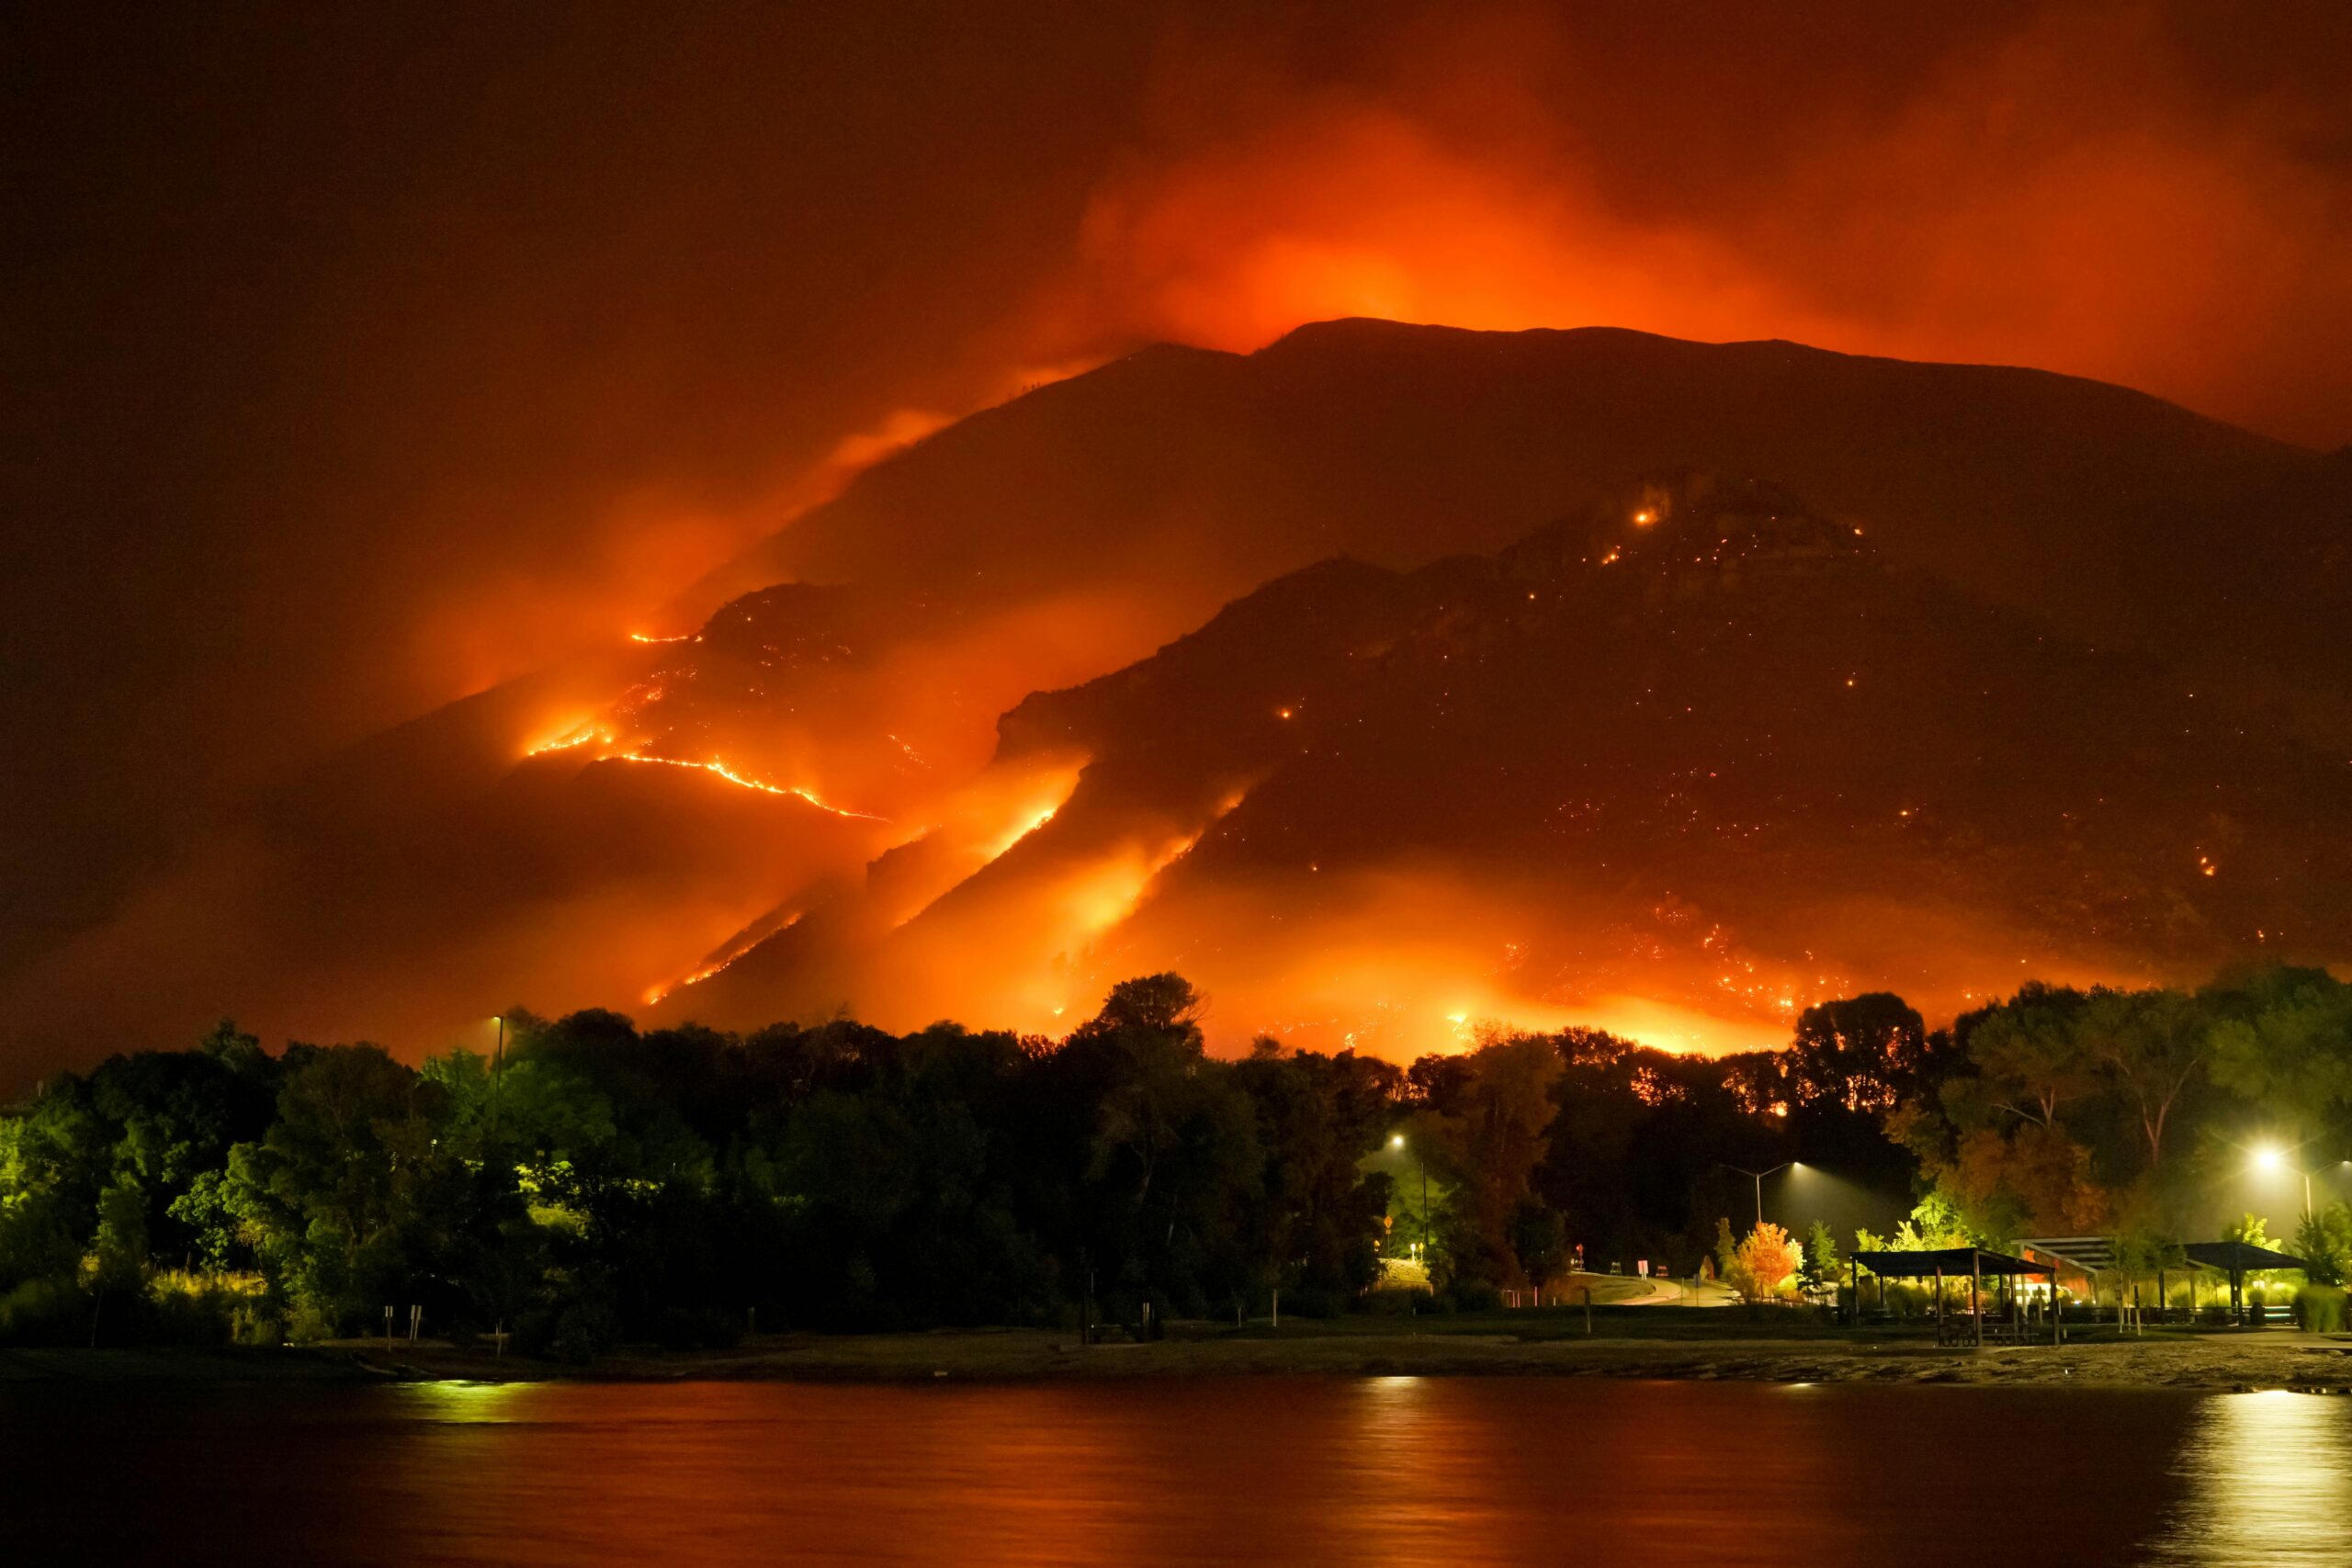 Waterfront homes in front of a backdrop of raging wildfires due to climate change